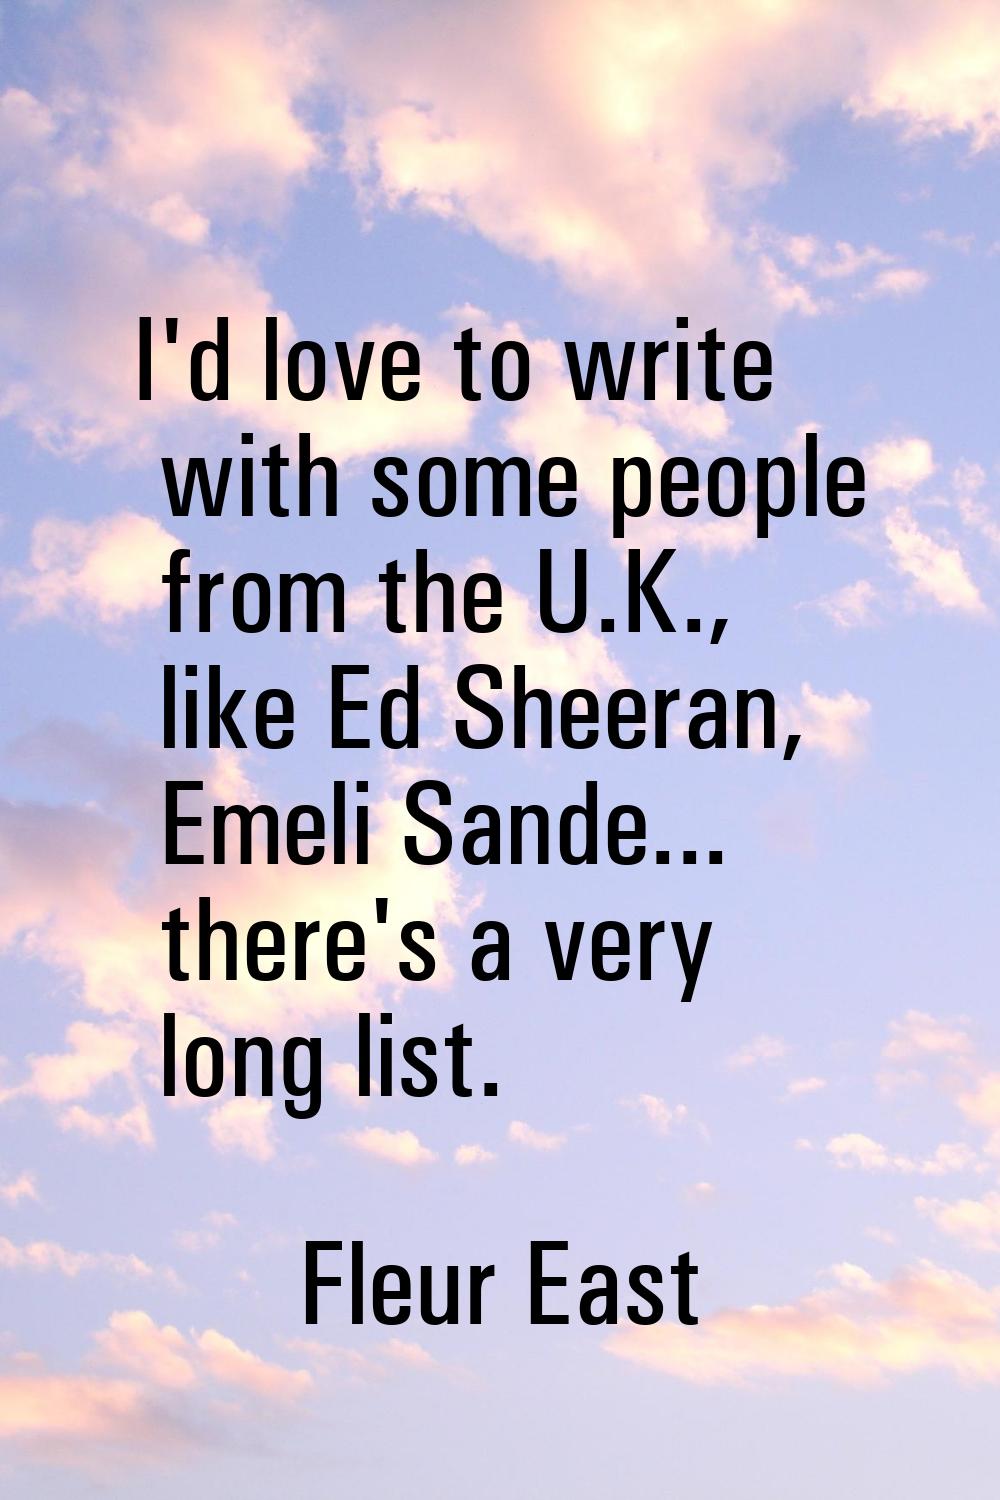 I'd love to write with some people from the U.K., like Ed Sheeran, Emeli Sande... there's a very lo